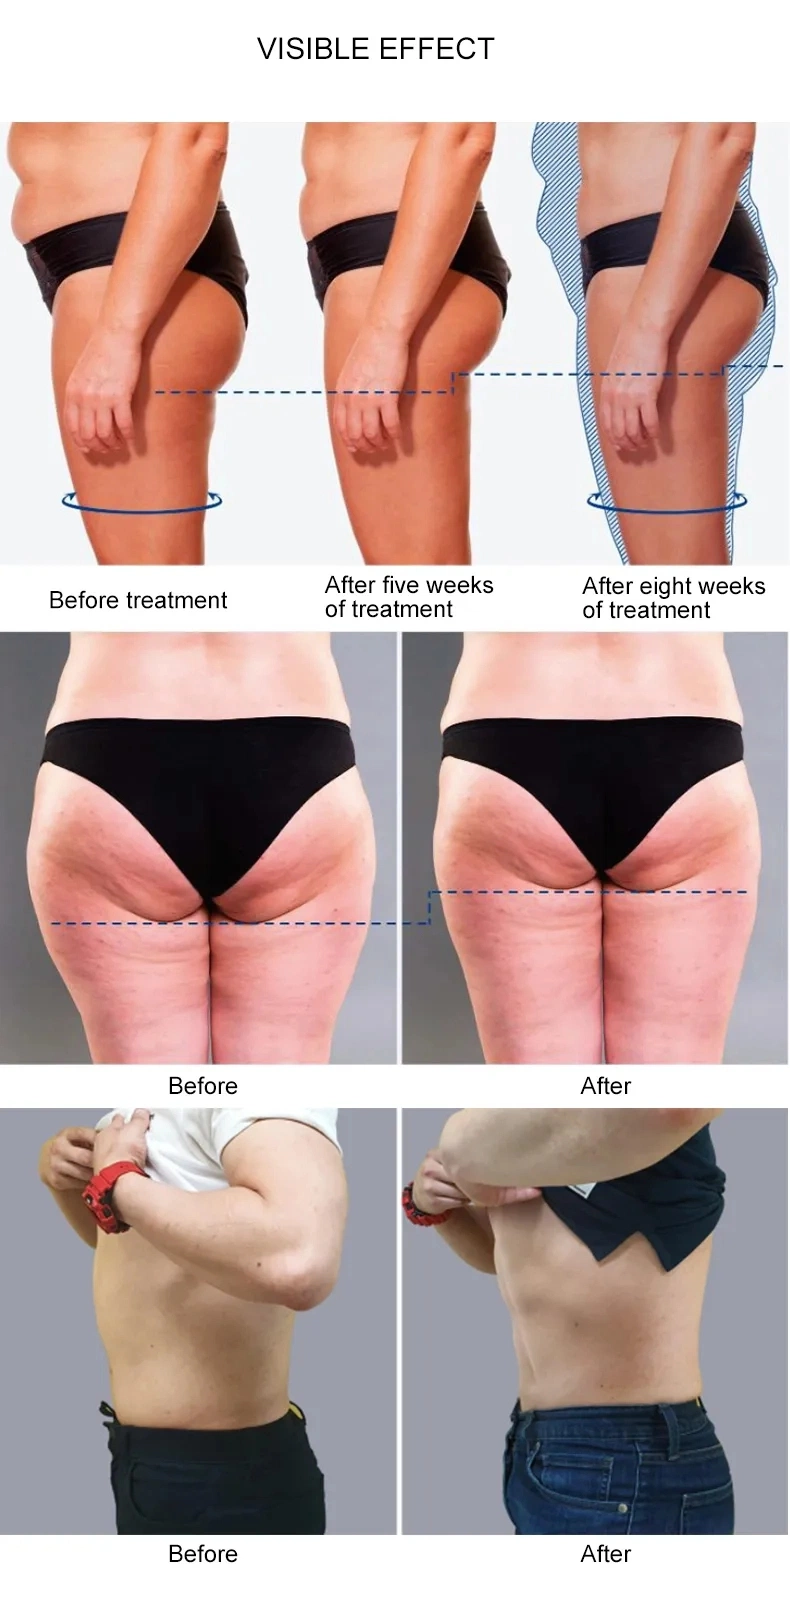 Focused System RF Shock Wave Eswt Shockwave Therapy Machines for Cellulite Reduction